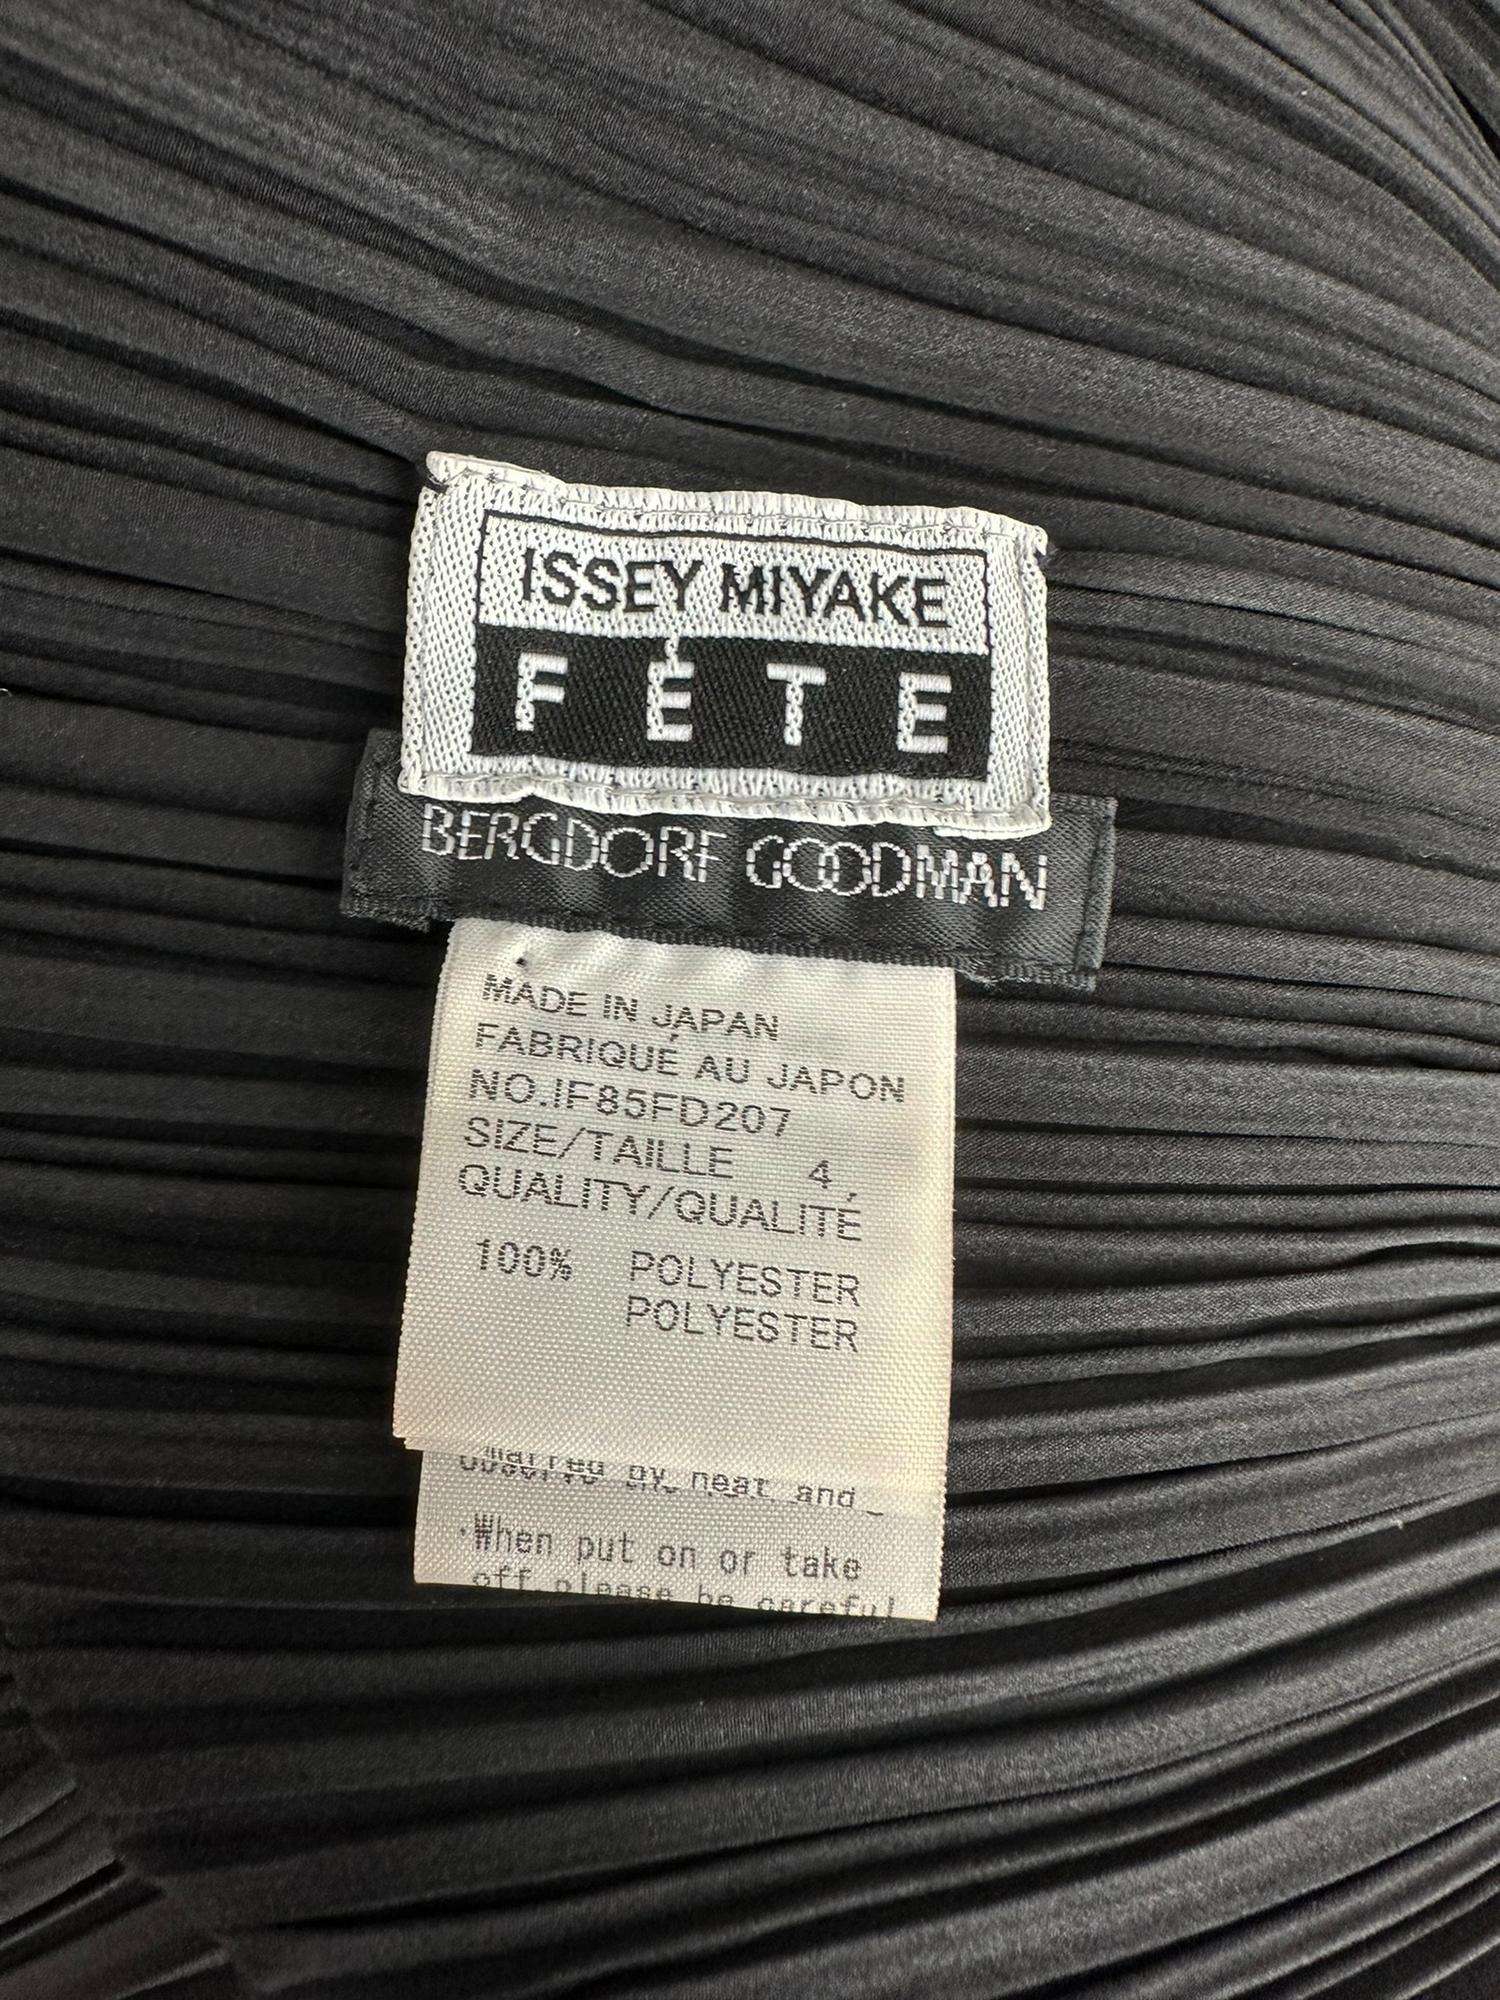 Issey Miyake Fete 2pc Jacket & Pant Black Pleats with Open Mesh Insertion Size 4 For Sale 8